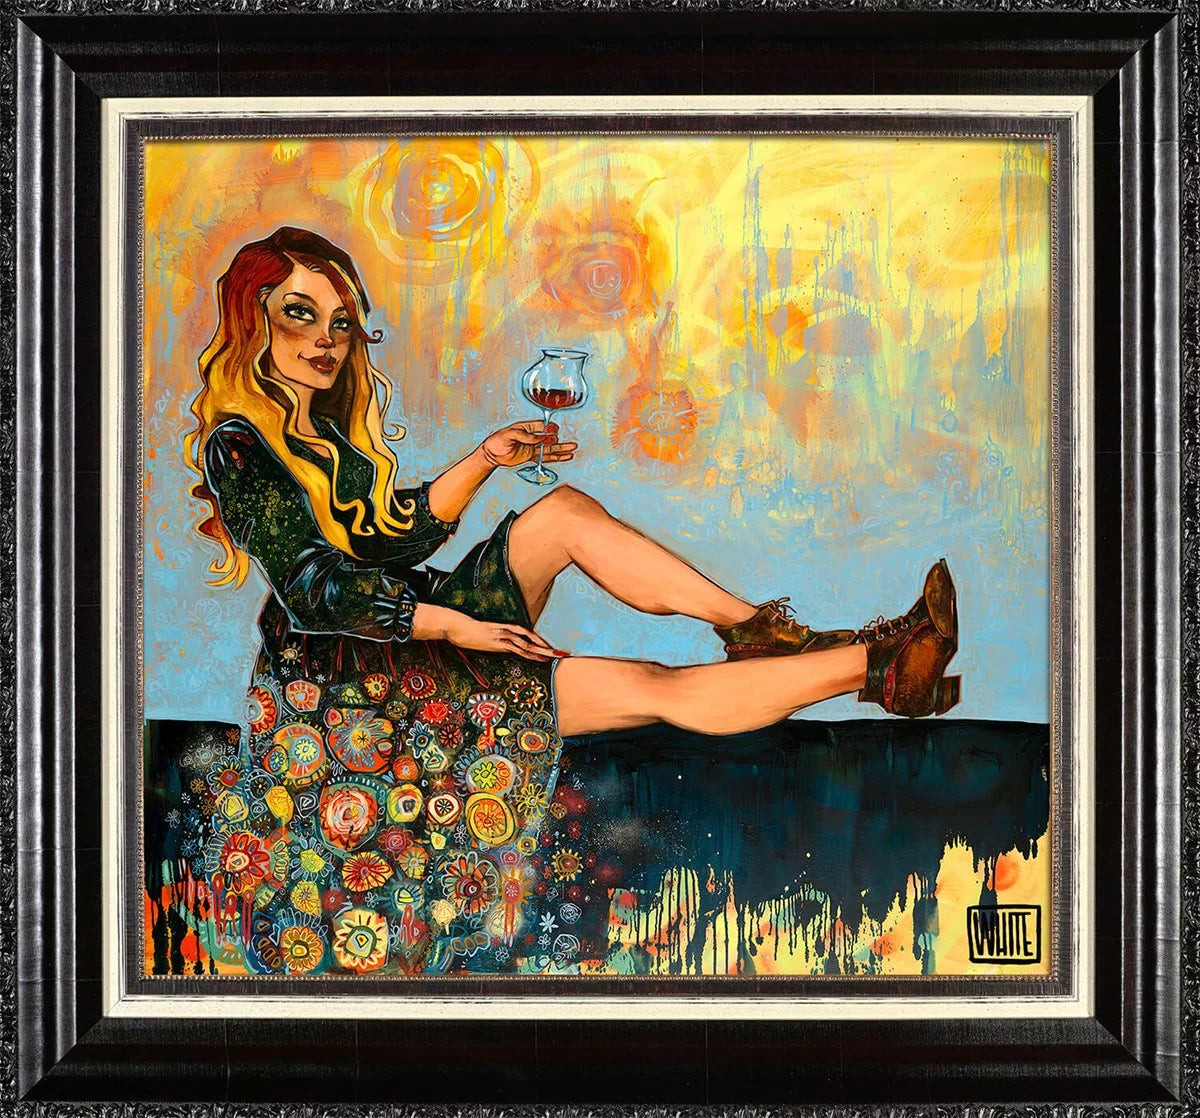 Todd White "Boots Like These" Limited Edition Canvas Giclee